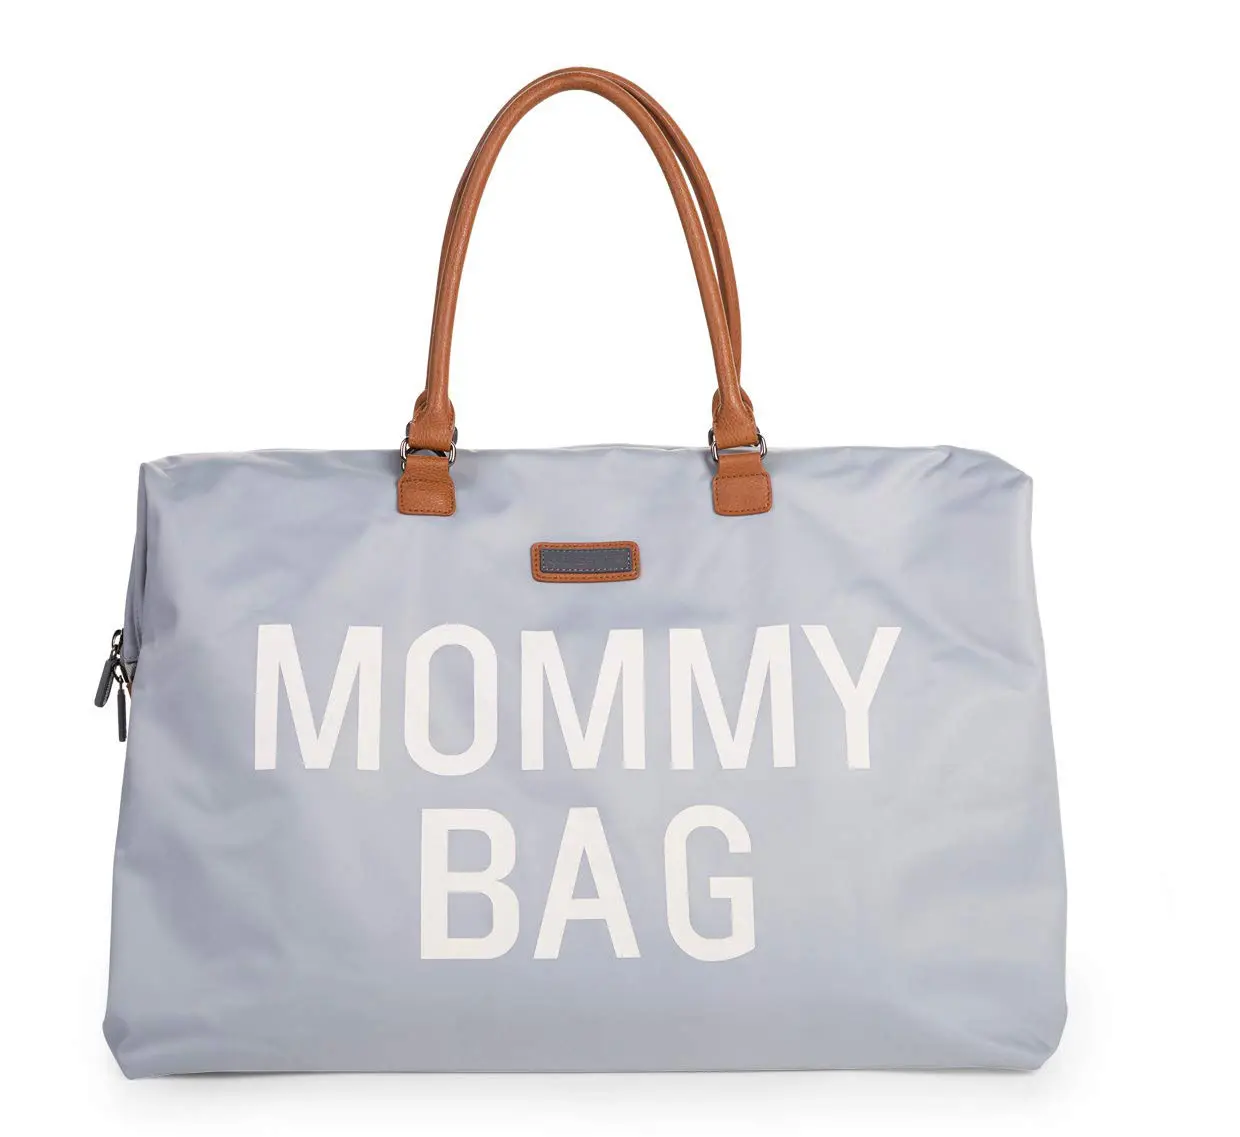 Fashion Travel Nylon Mommy bag Nappy Maternity Tote Bag for Mothers